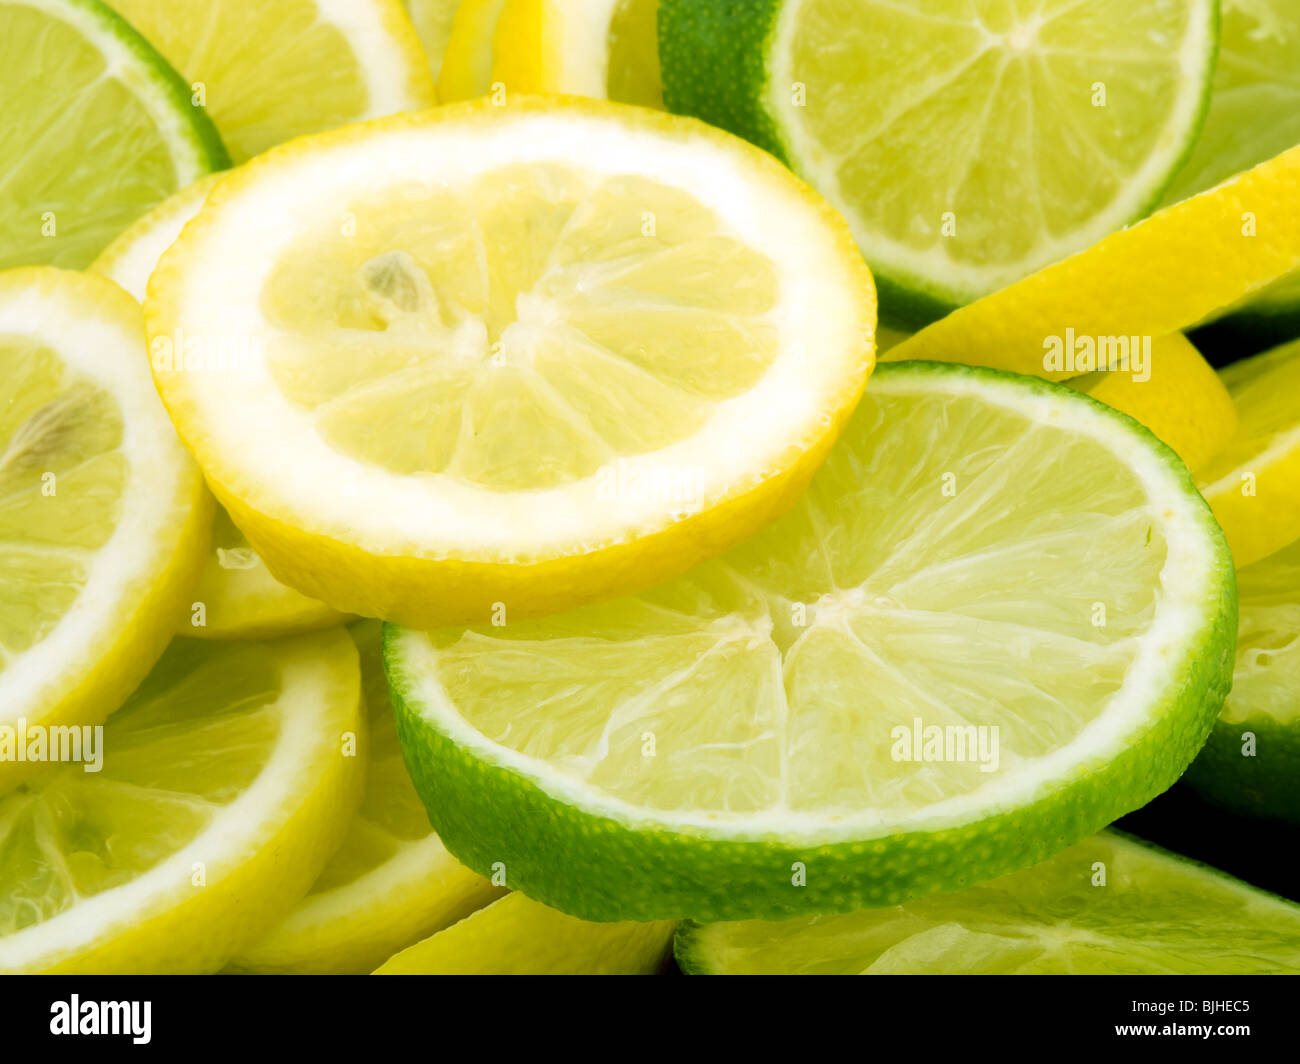 Closeup picture of lemon and lime slices. Stock Photo